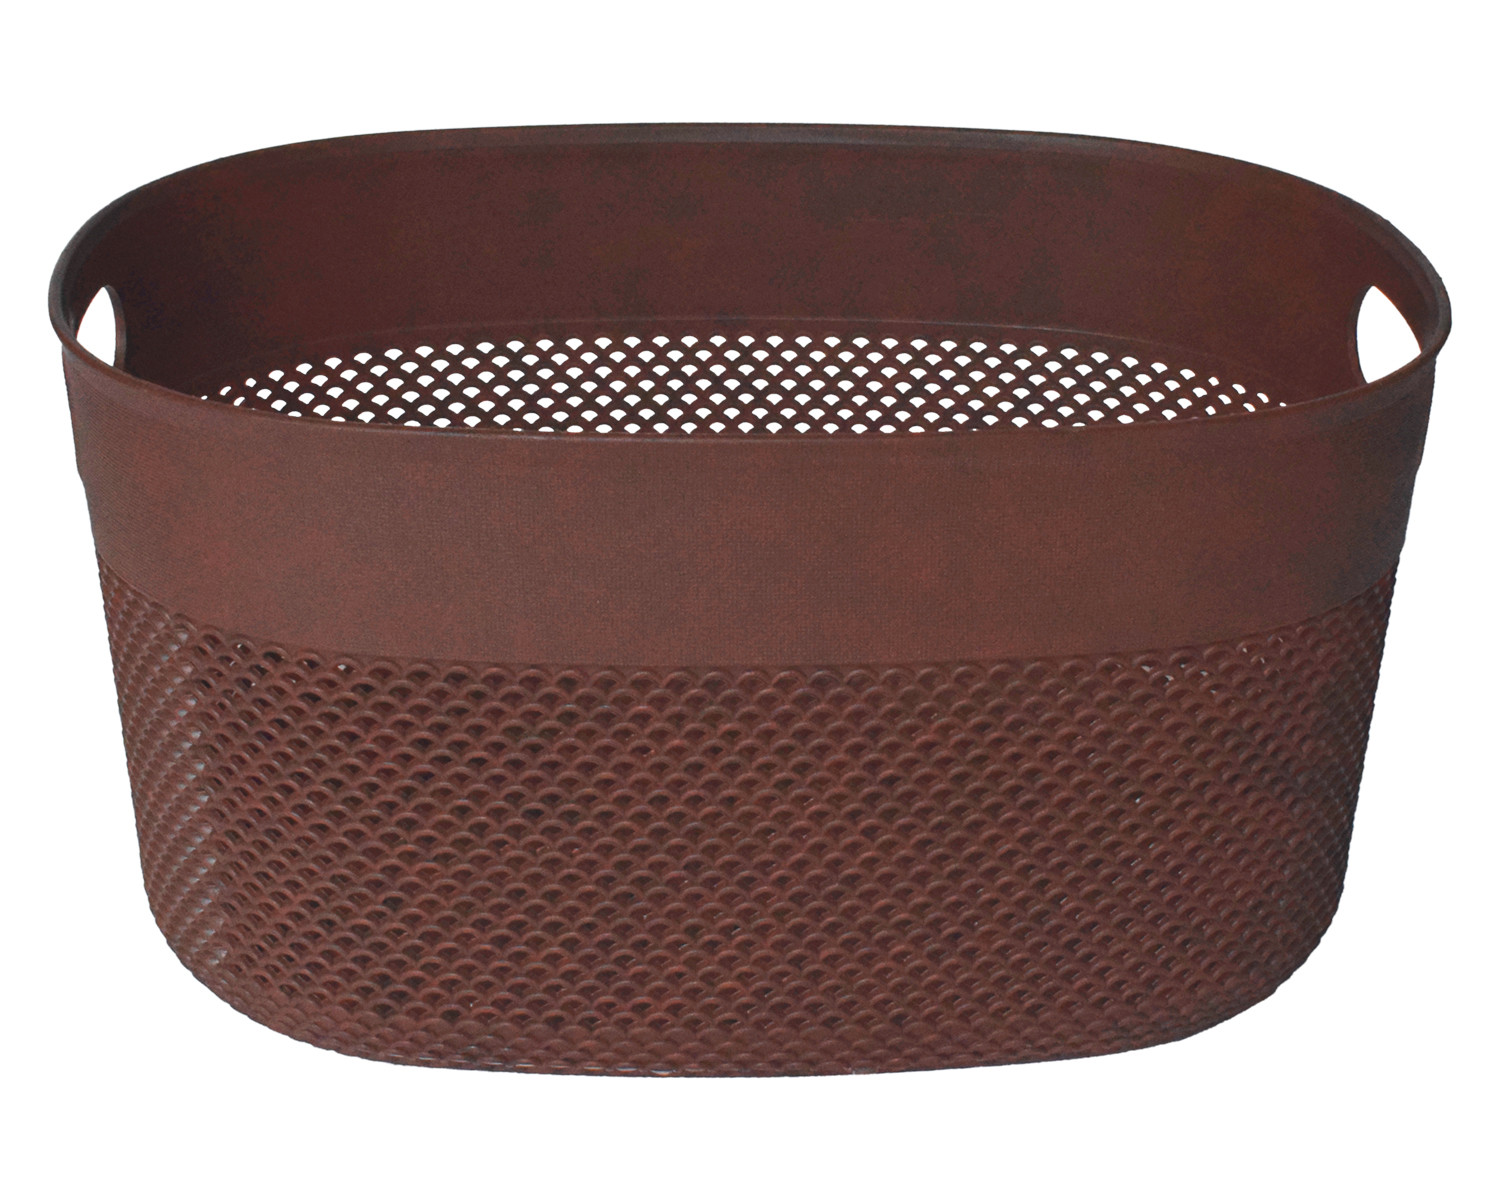 Kuber Industries Unbreakable Large Multipurpose Storage Baskets with lid|Design-Netted|Material-Plastic|Shape-Oval|Color-Brown